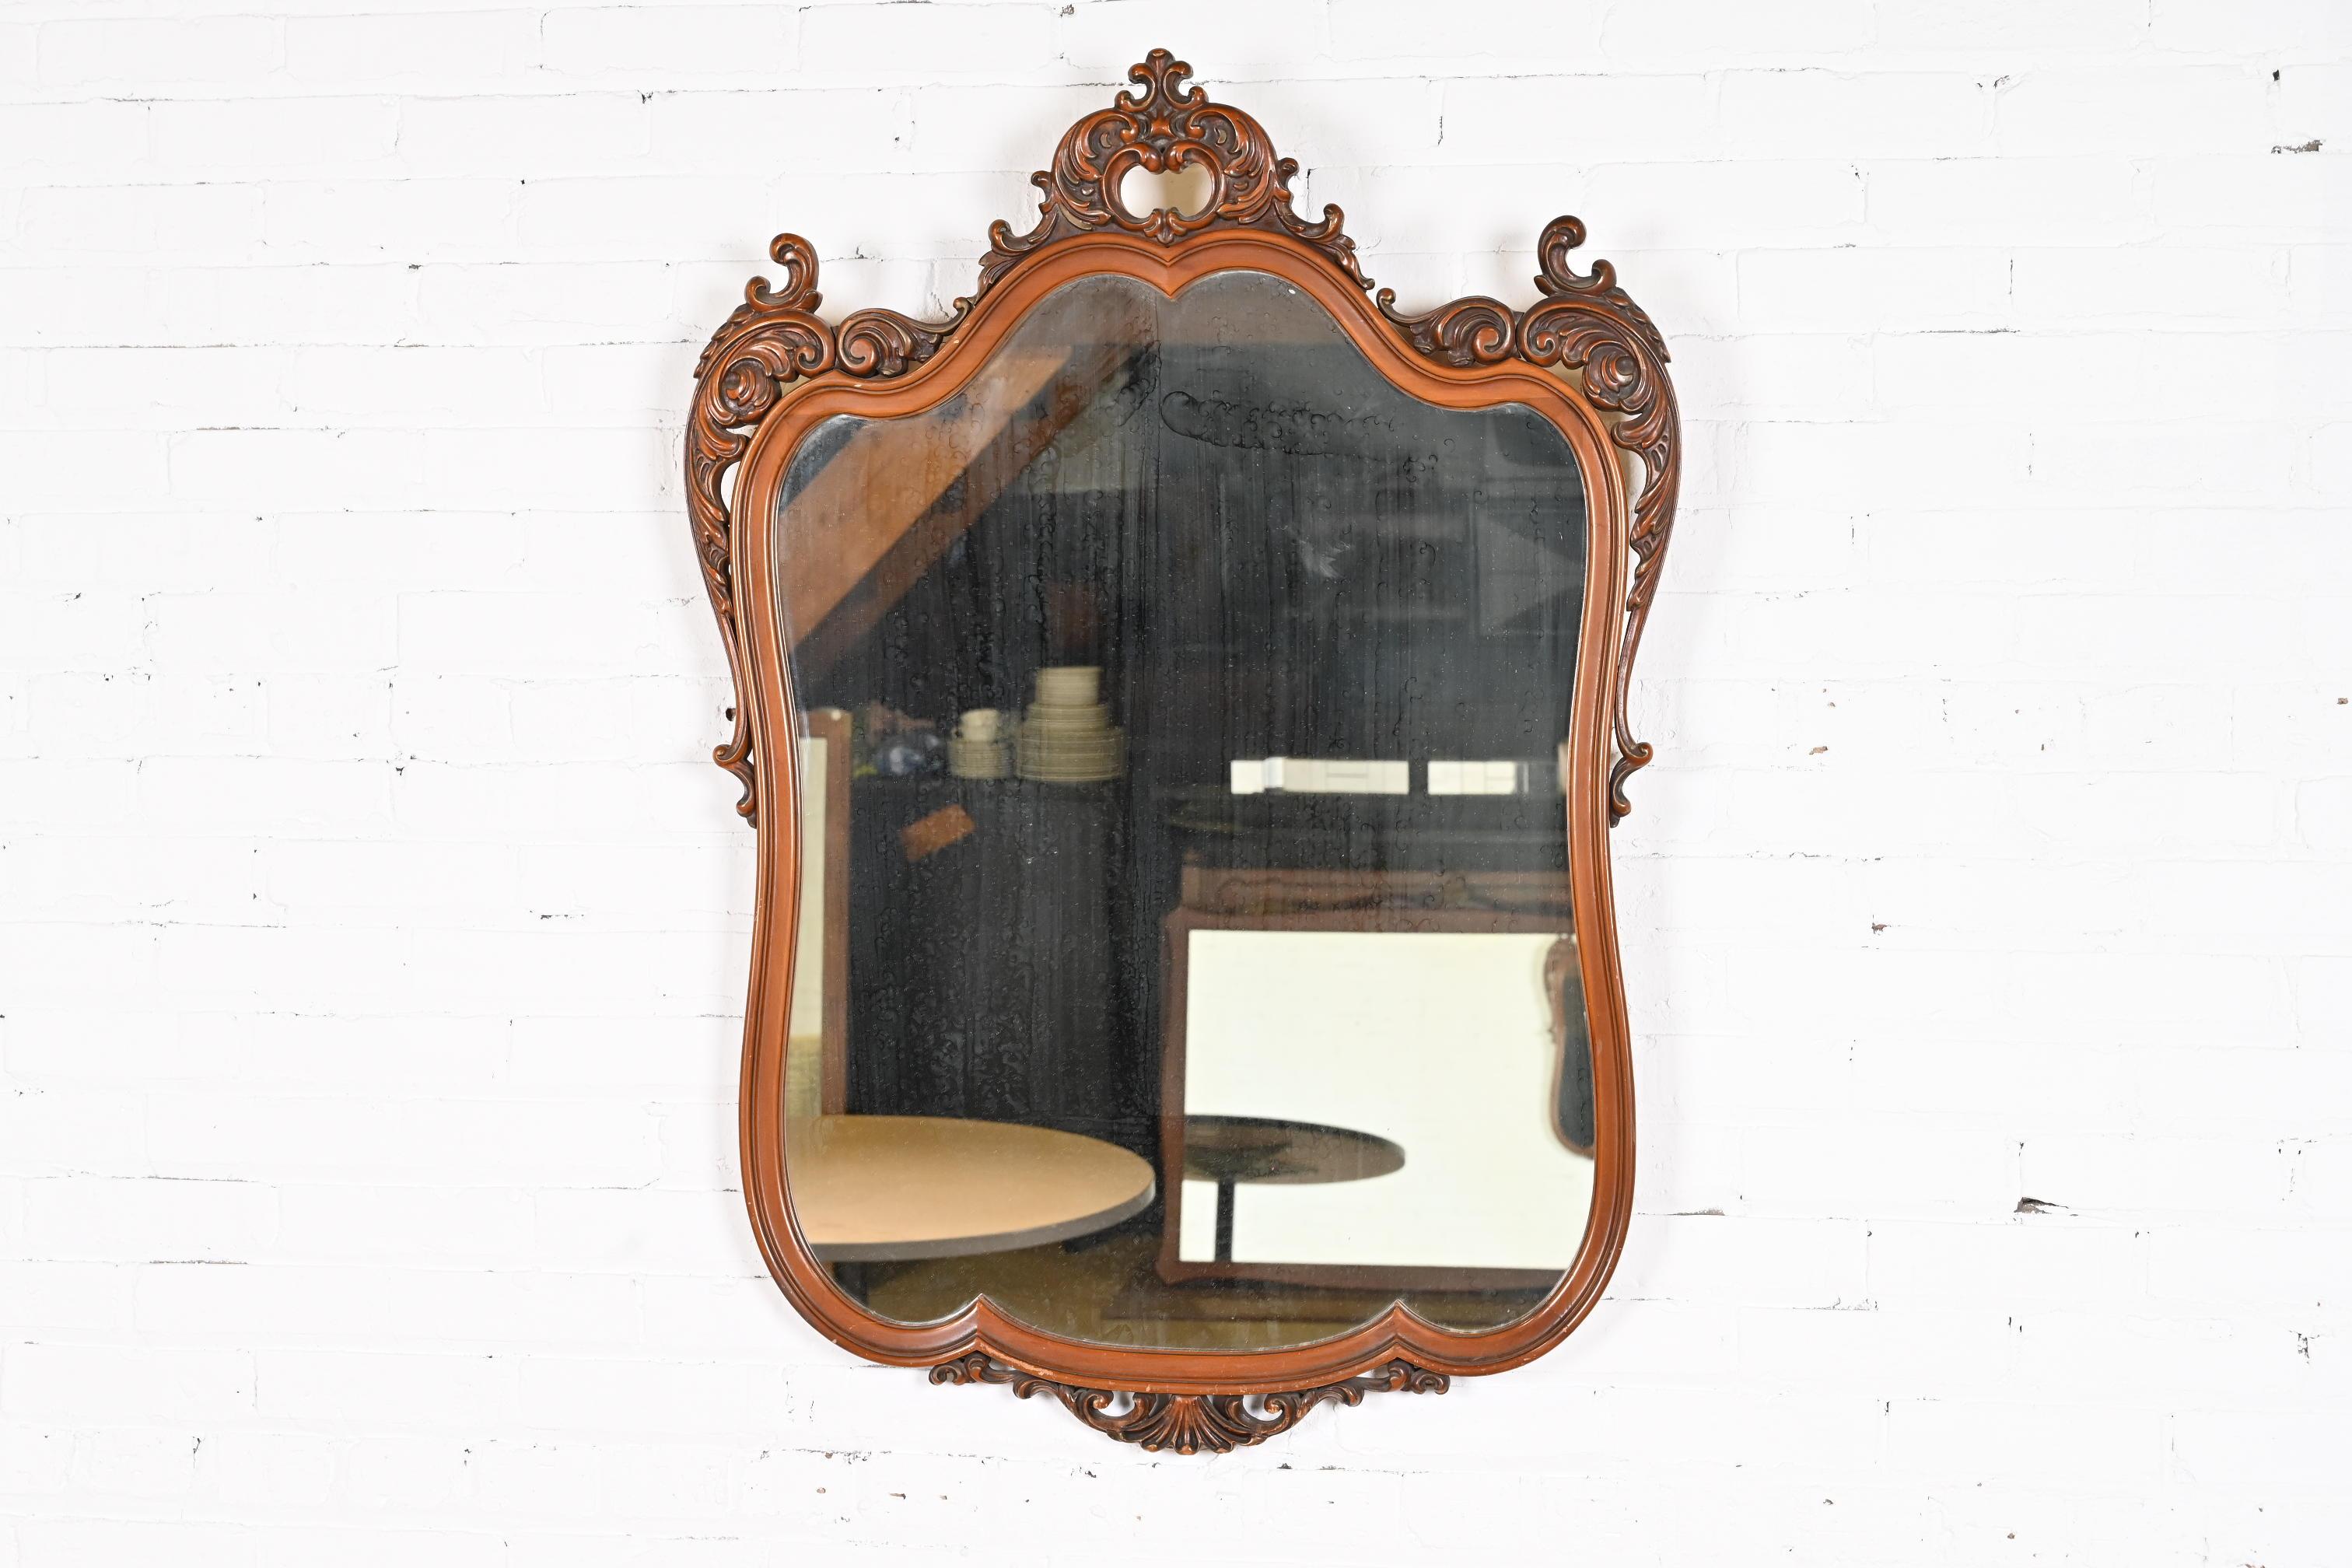 A beautiful vintage Louis XV French Rococo or Baroque style carved walnut framed wall mirror

In the manner of Romweber

USA, Circa 1940s

Measures: 31